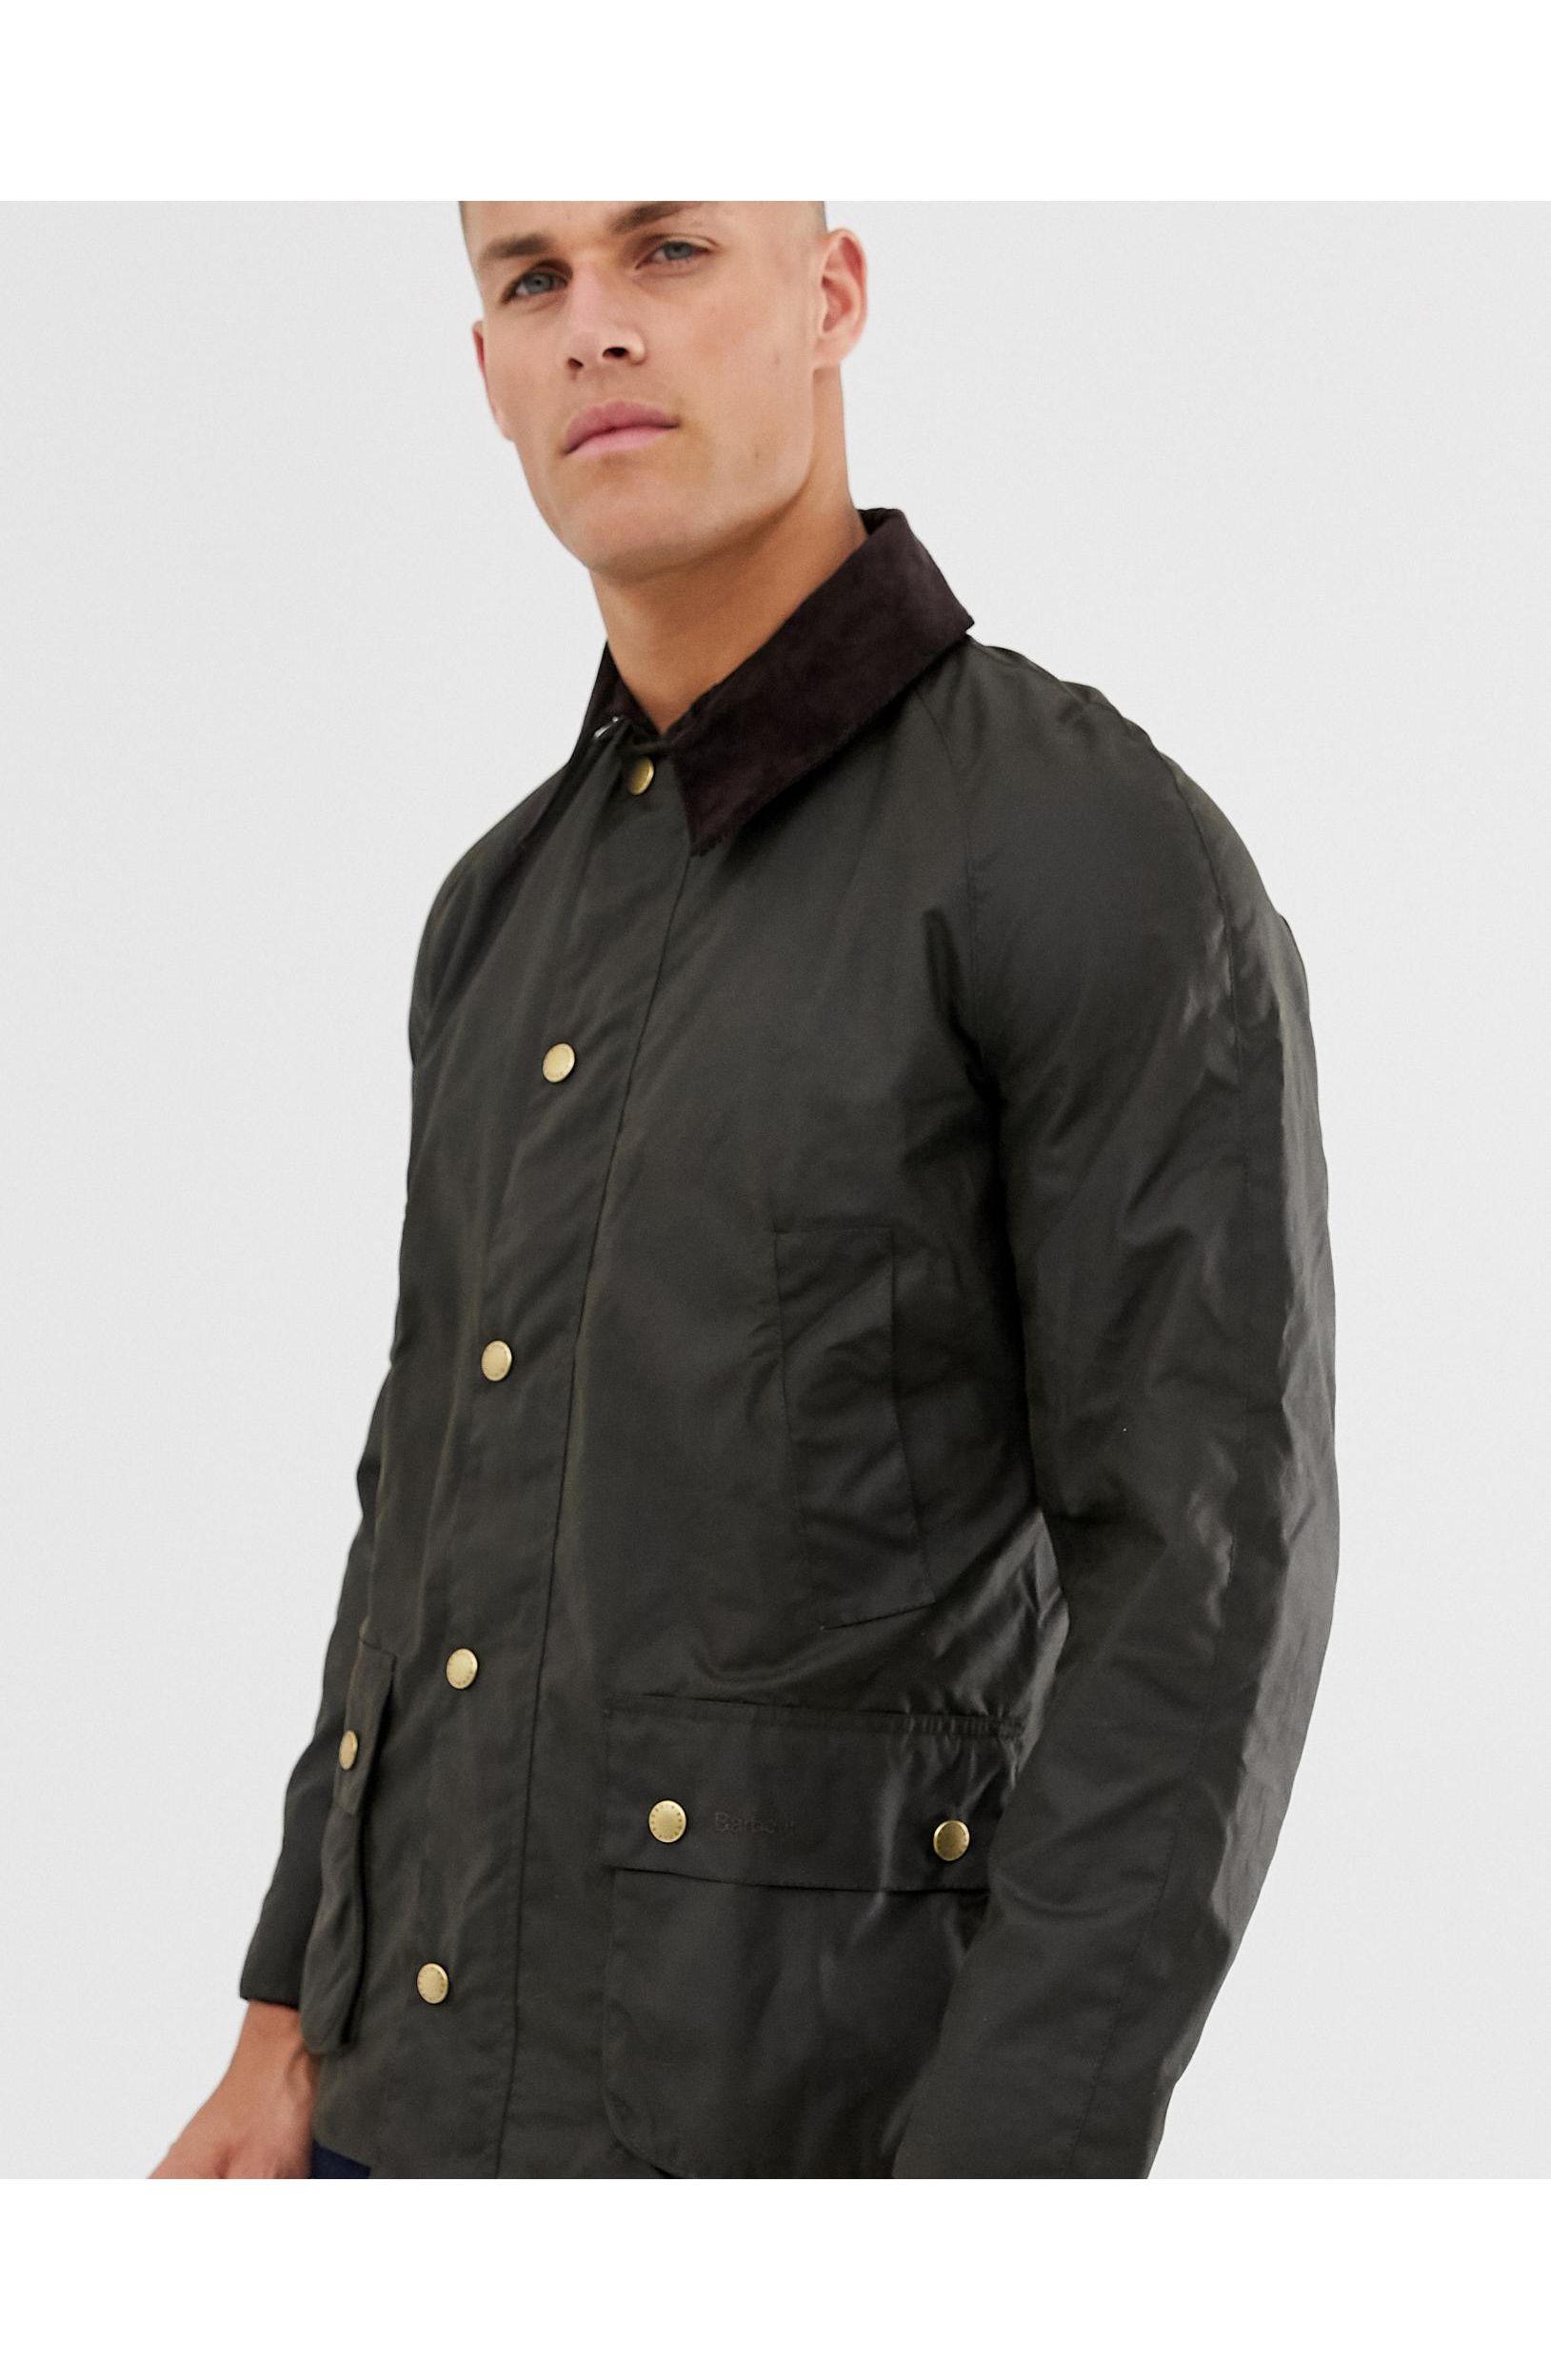 Barbour Cotton Ashby Wax Jacket Olive in Green for Men - Lyst